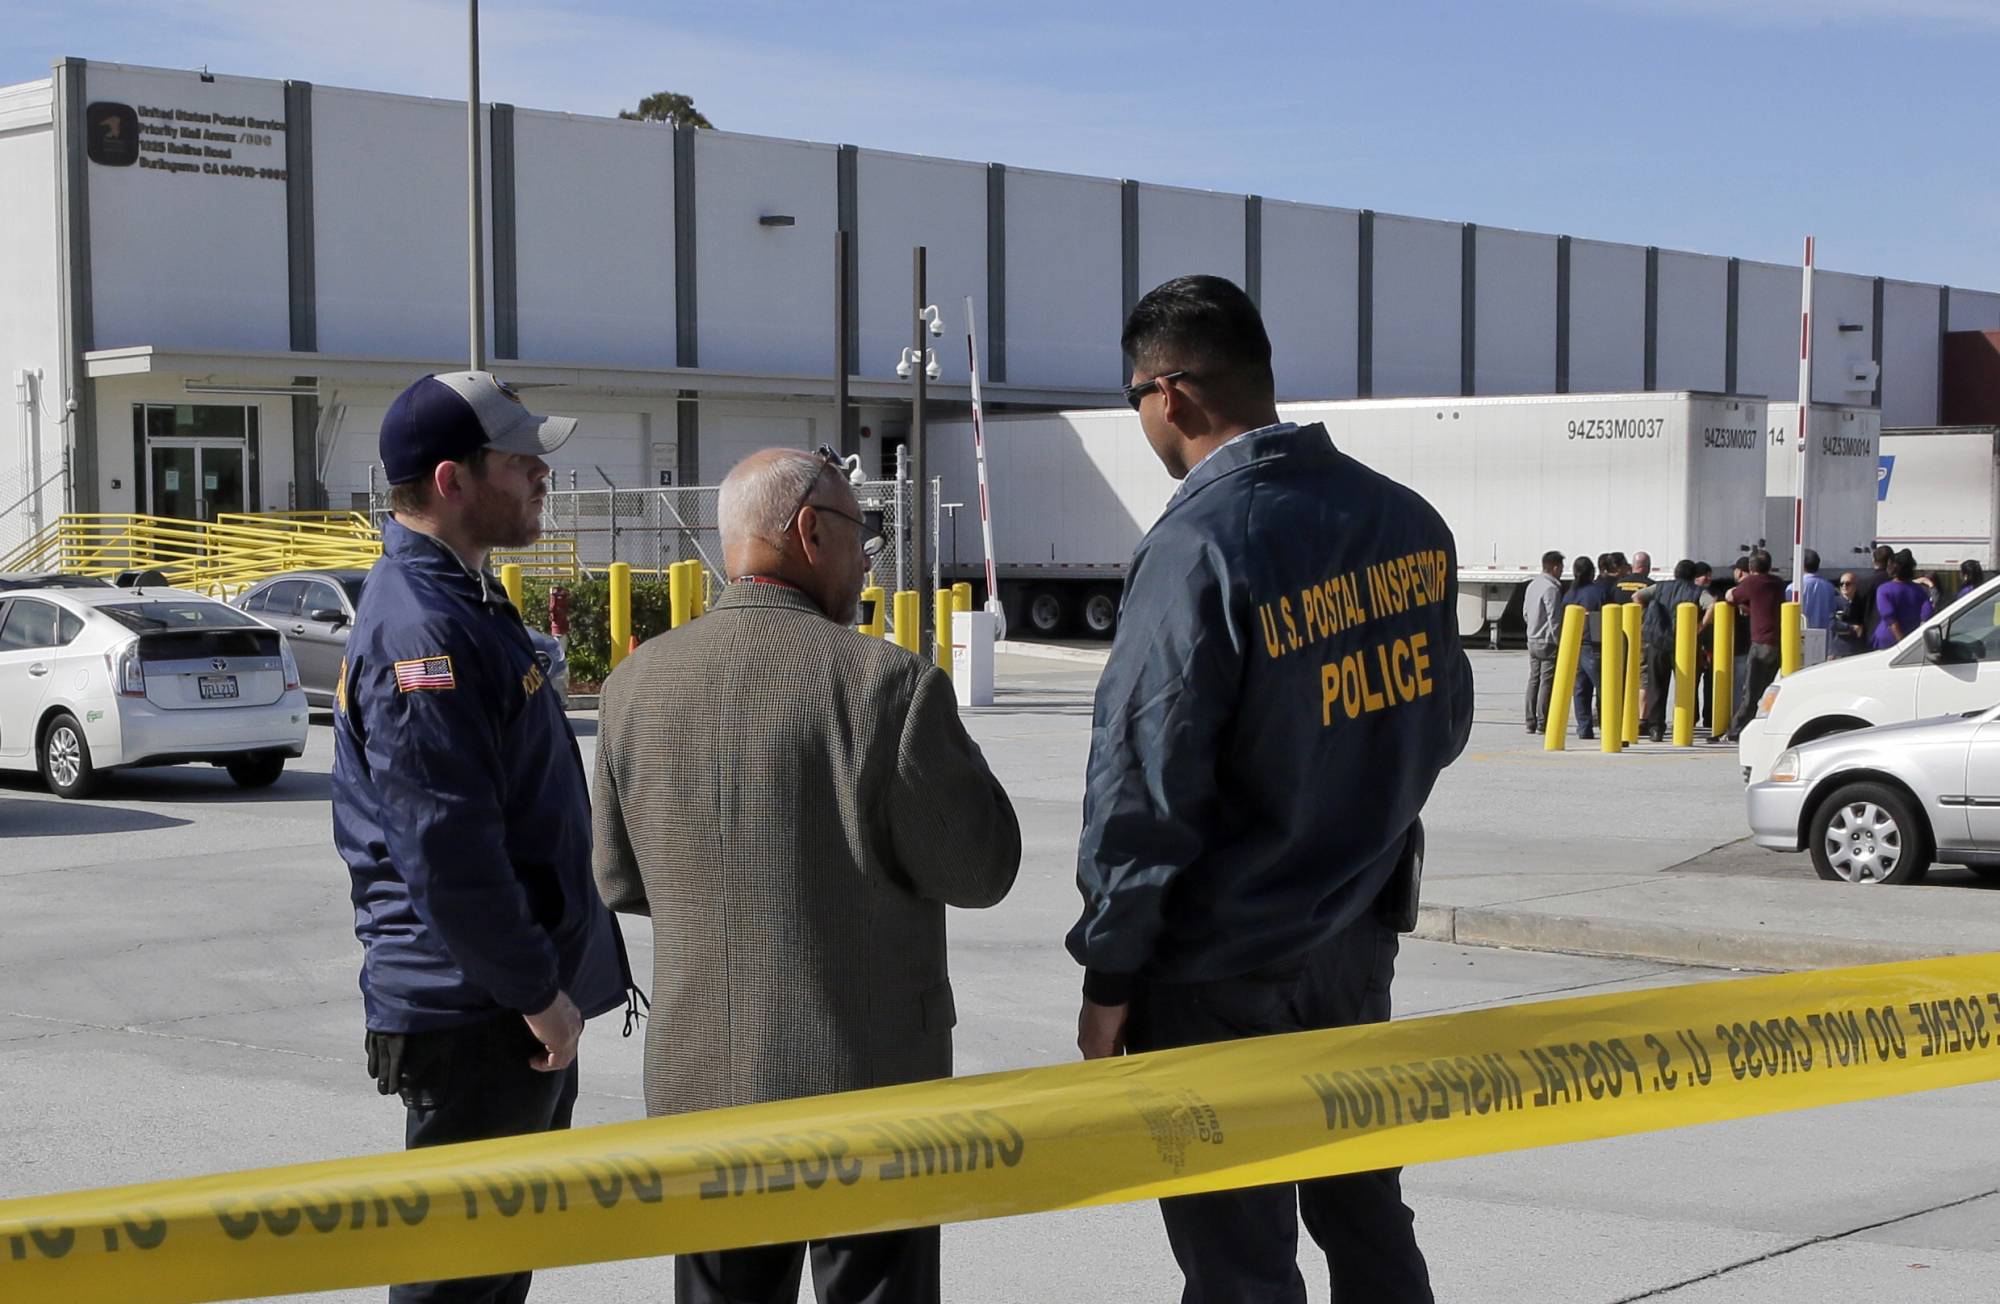 Postal inspectors confer outside of a postal facility in Burlingame, Calif., on Friday, Oct. 26. 2018. FBI spokesman Prentice Danner says a suspicious package seized at this facility near San Francisco and addressed to billionaire political activist Tom Steyer has several similarities to 13 explosive devices that were addressed to prominent Democrats across the country. When asked if authorities believe the package found Friday is related to the others, Danner said the 